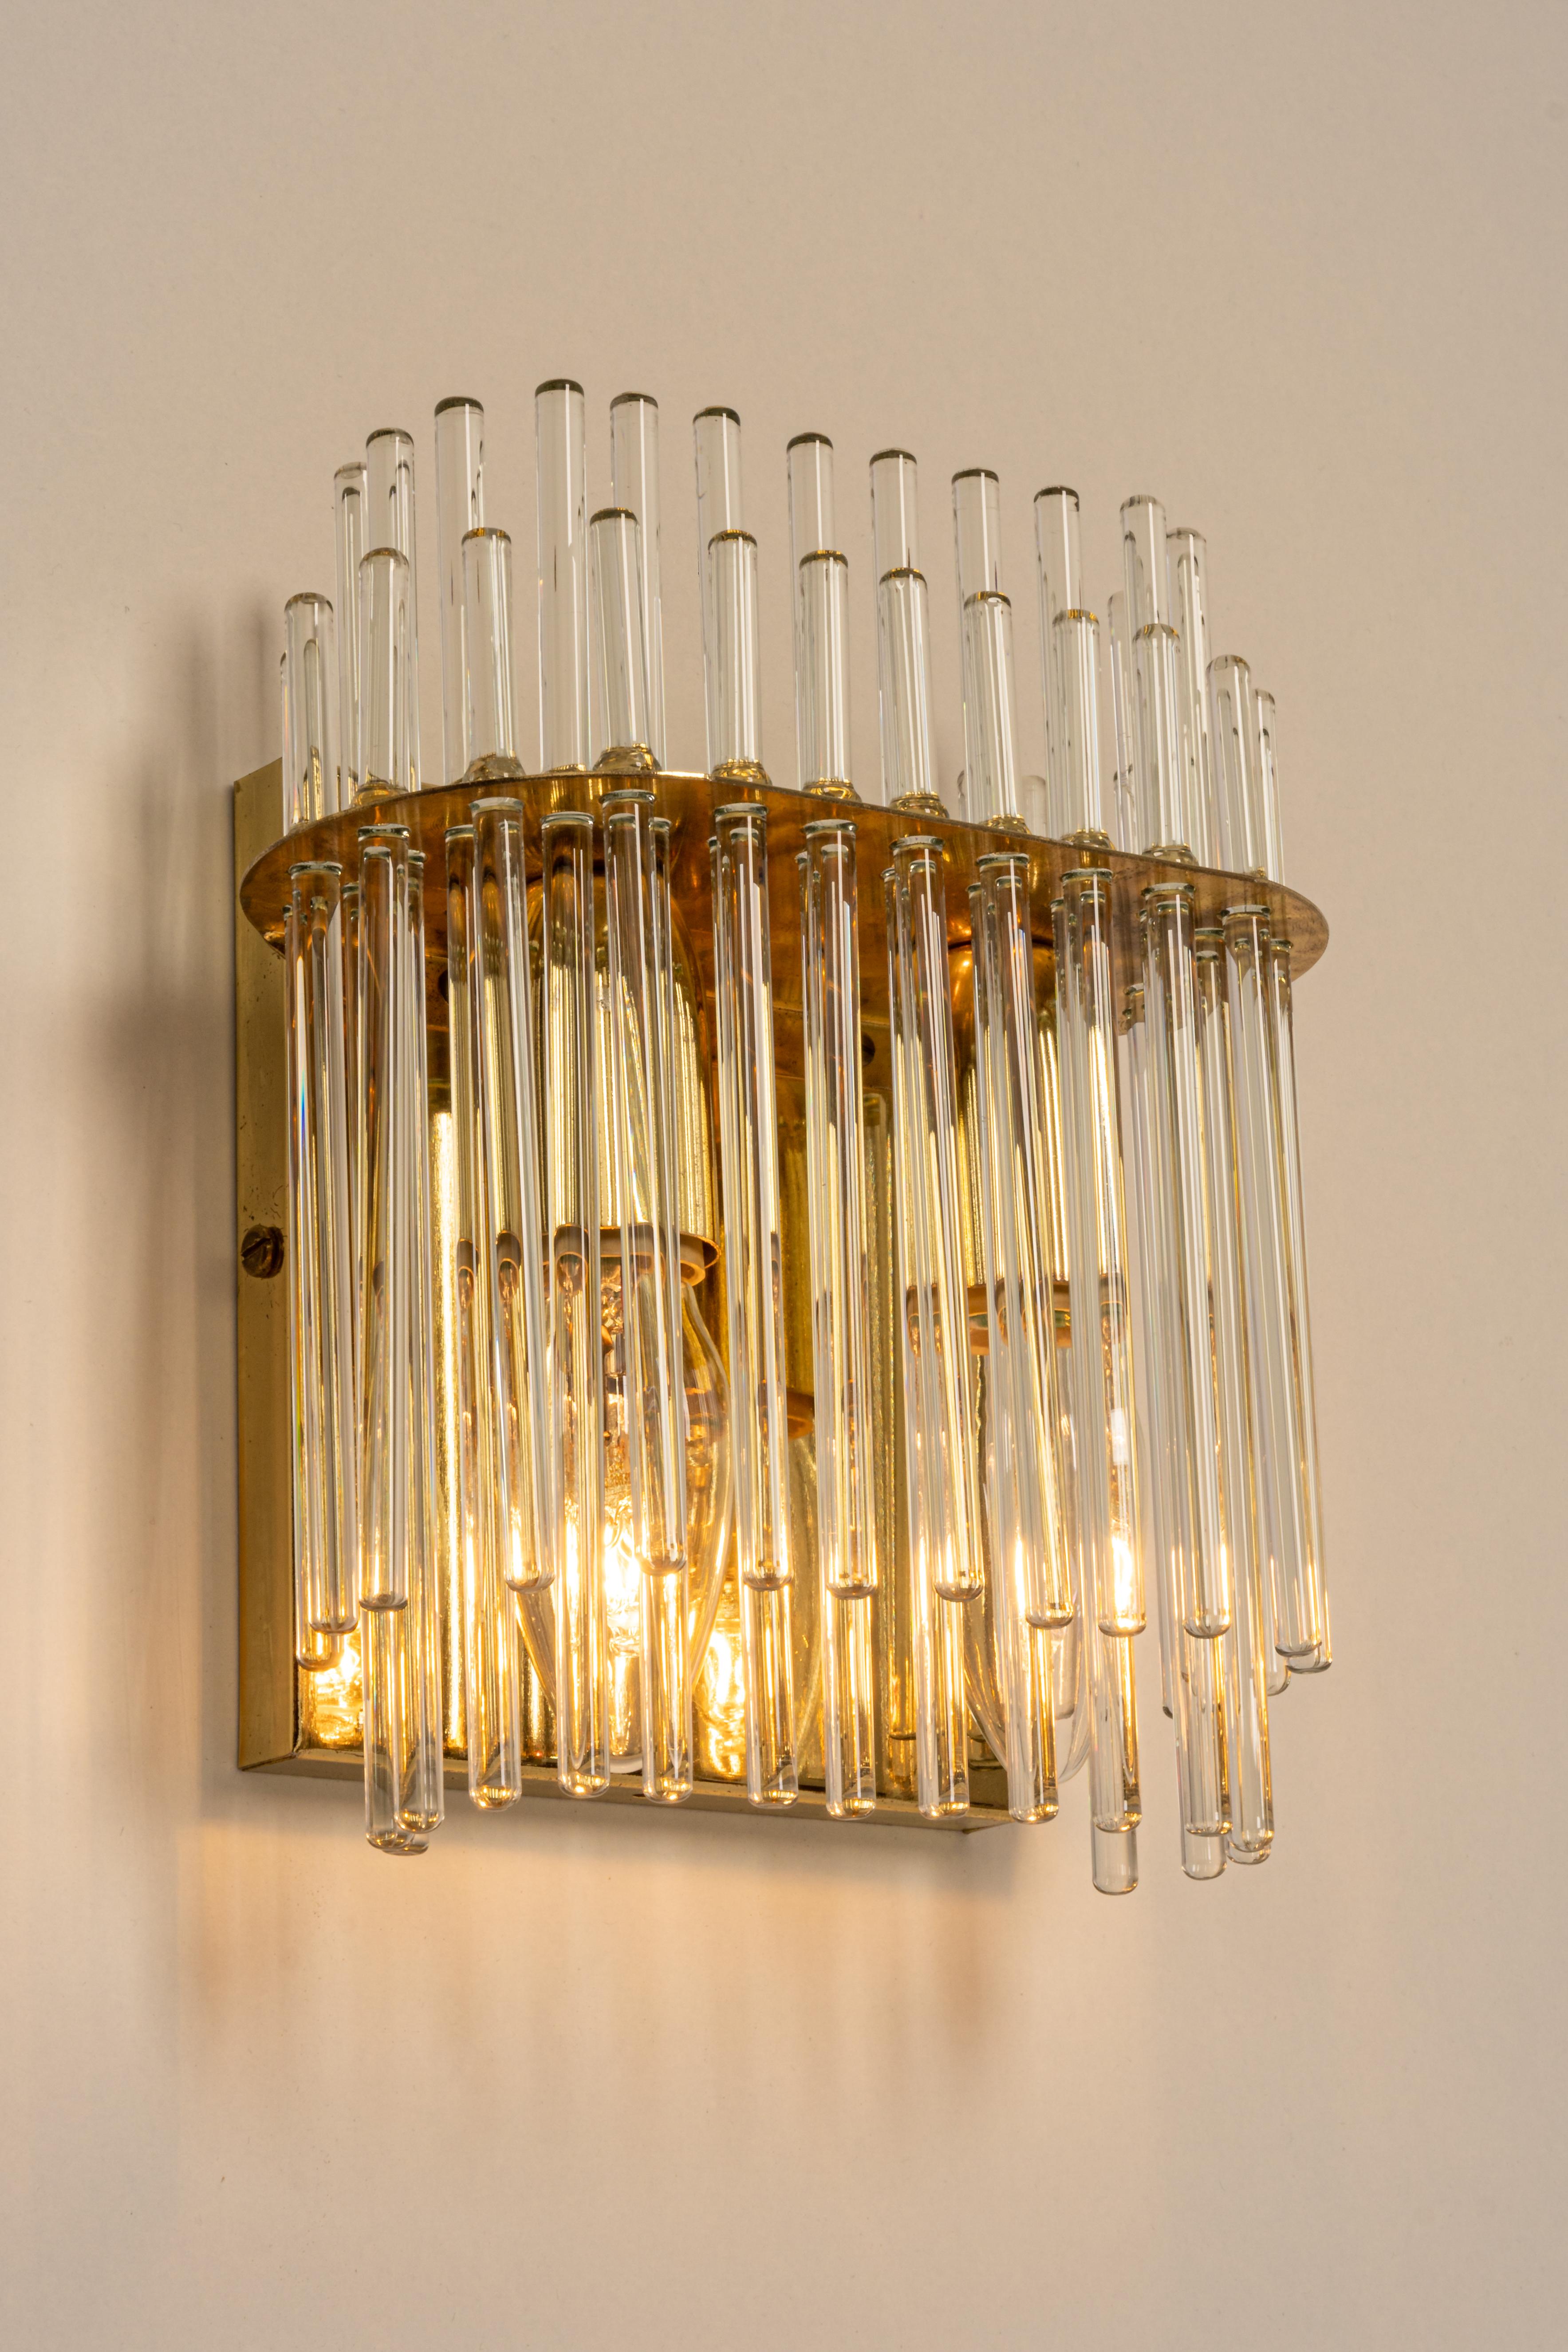 Pair of Wonderful Crystal Rods Sconces Italy, 1970s For Sale 2